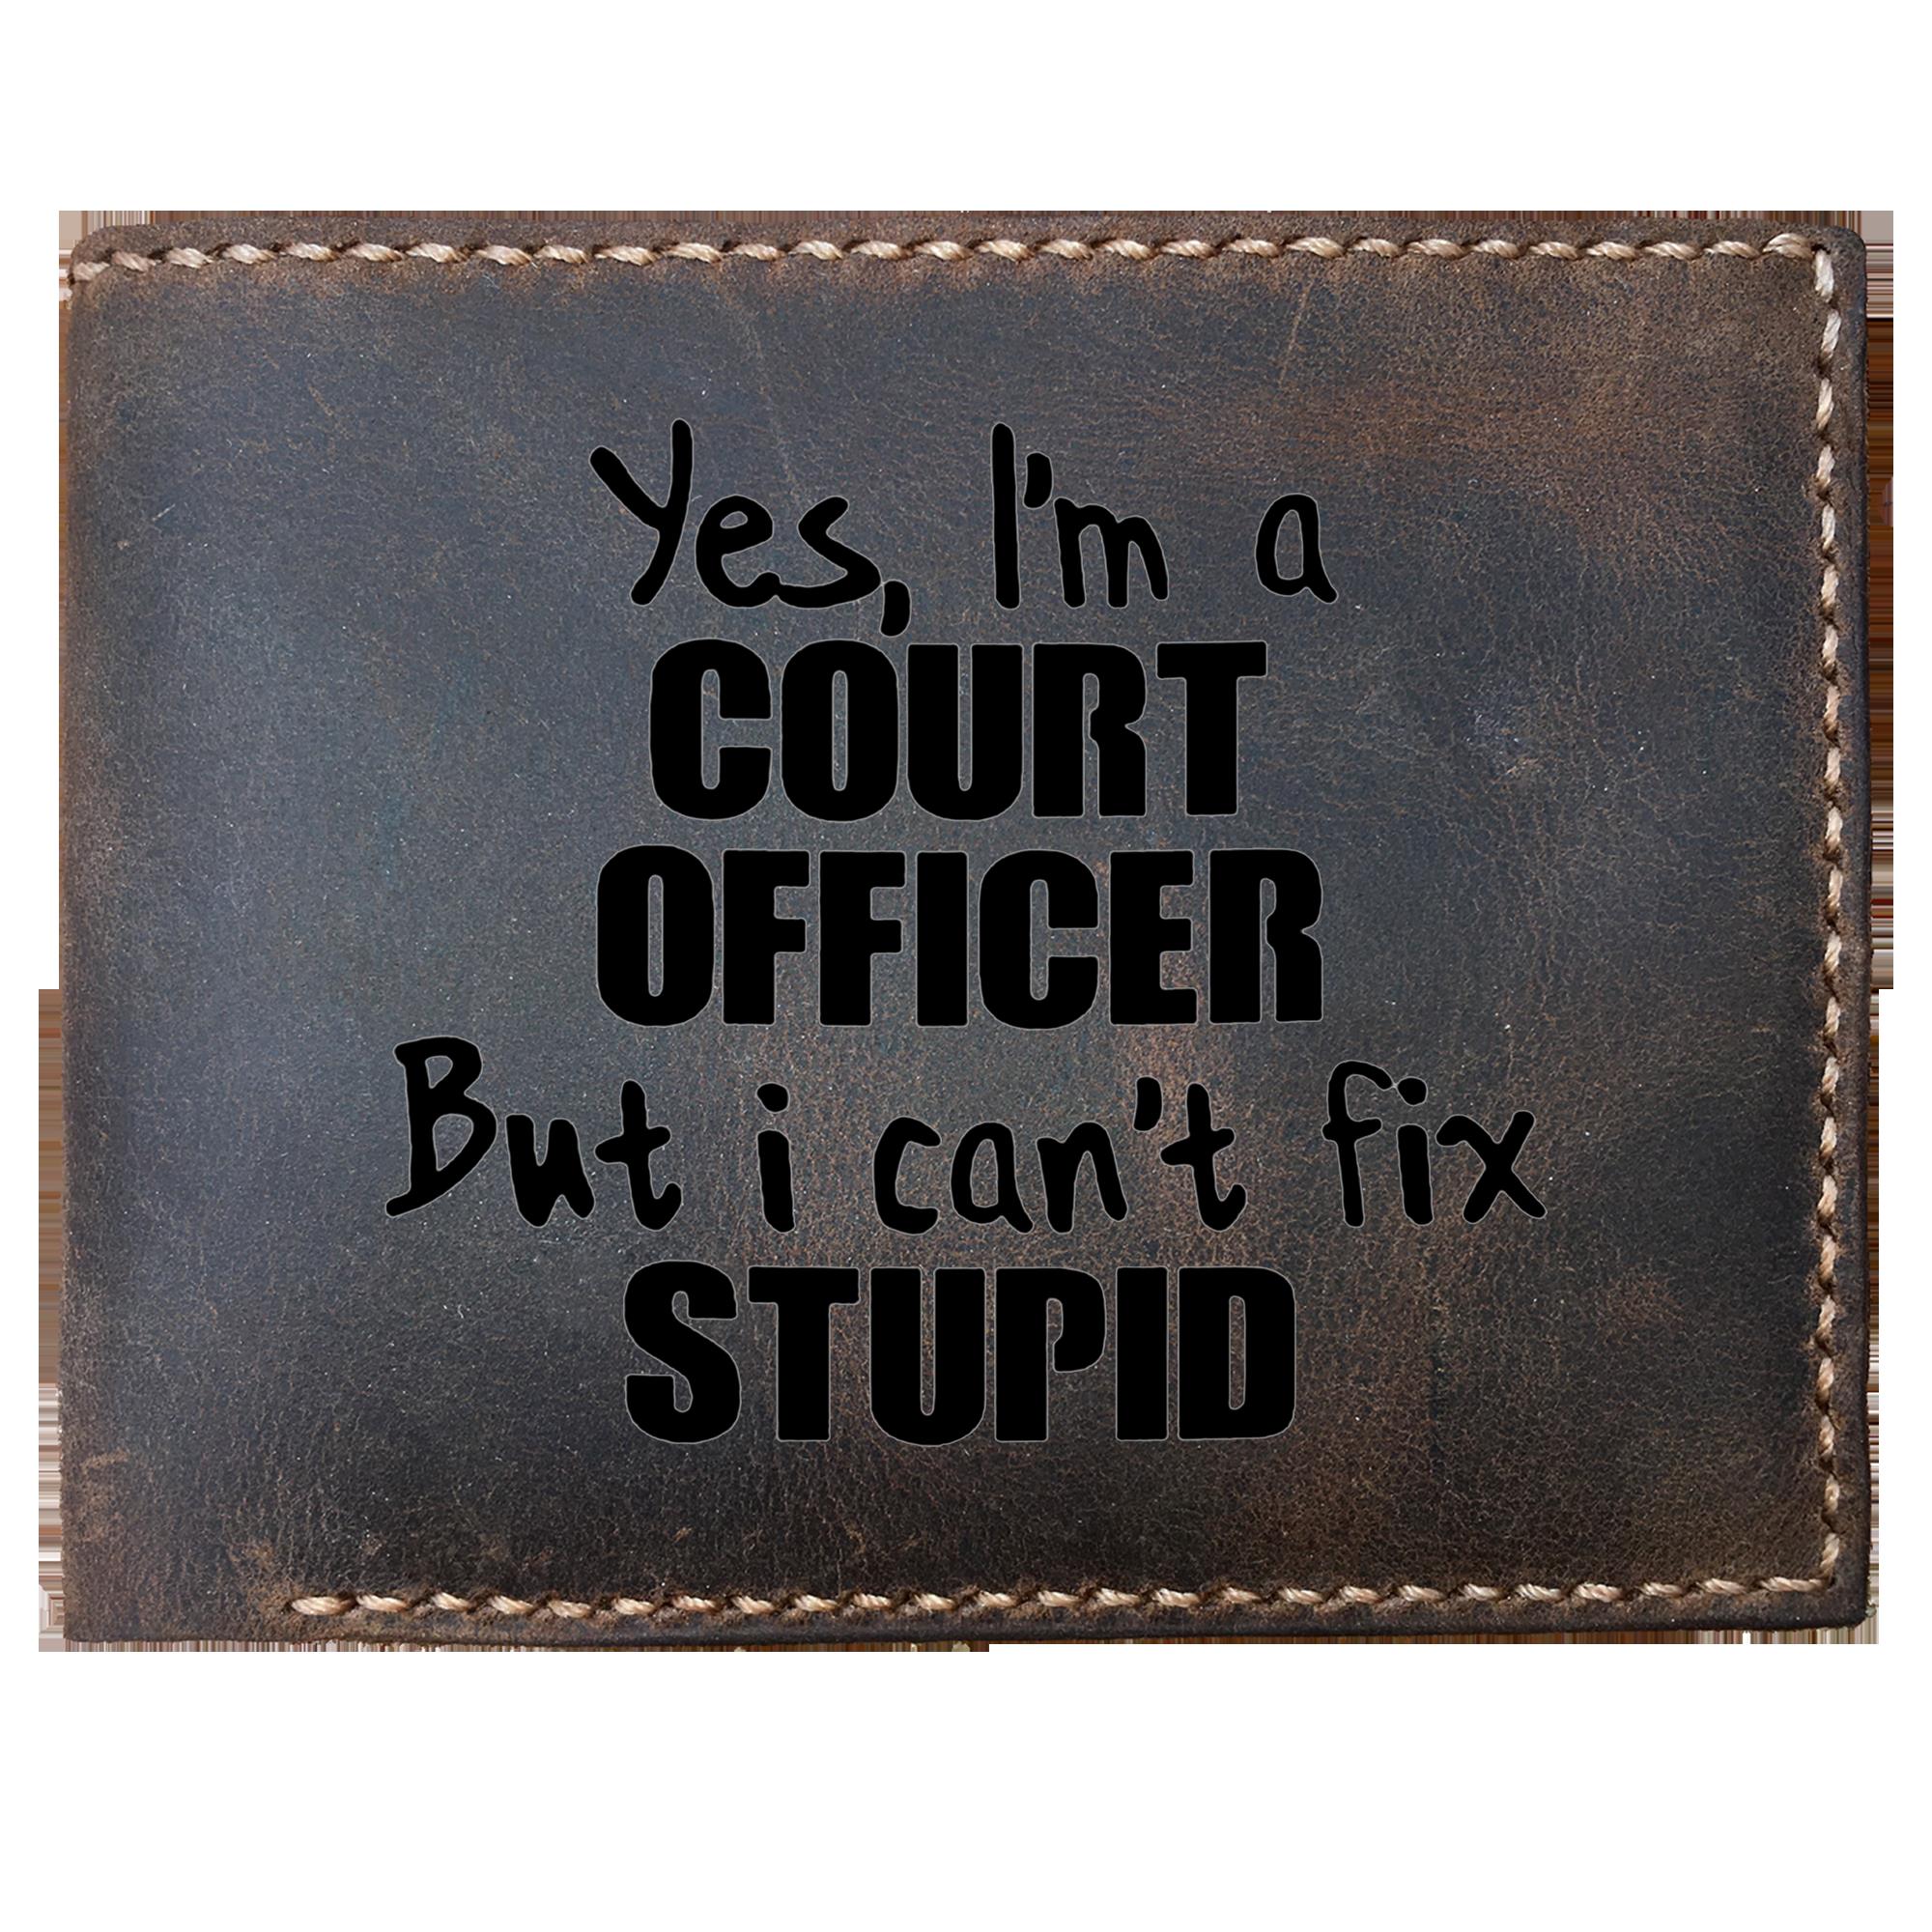 Skitongifts Funny Custom Laser Engraved Bifold Leather Wallet For Men, Yes Im A Court Officer But I Can't Fix Stupid